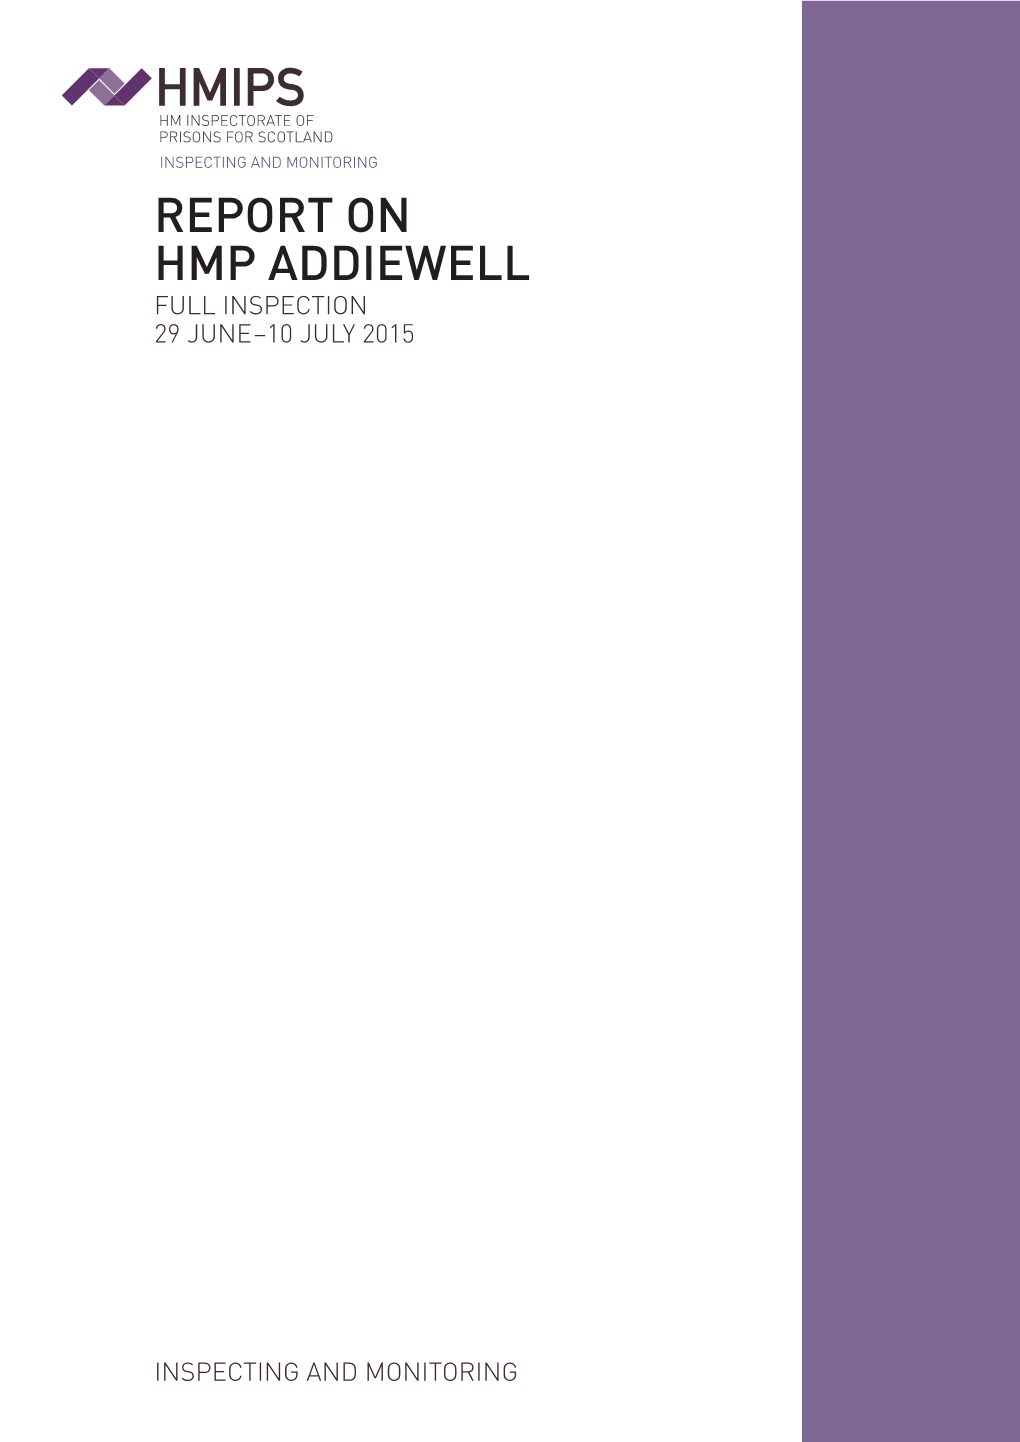 Report on HMP Addiewell, Full Inspection 29 June